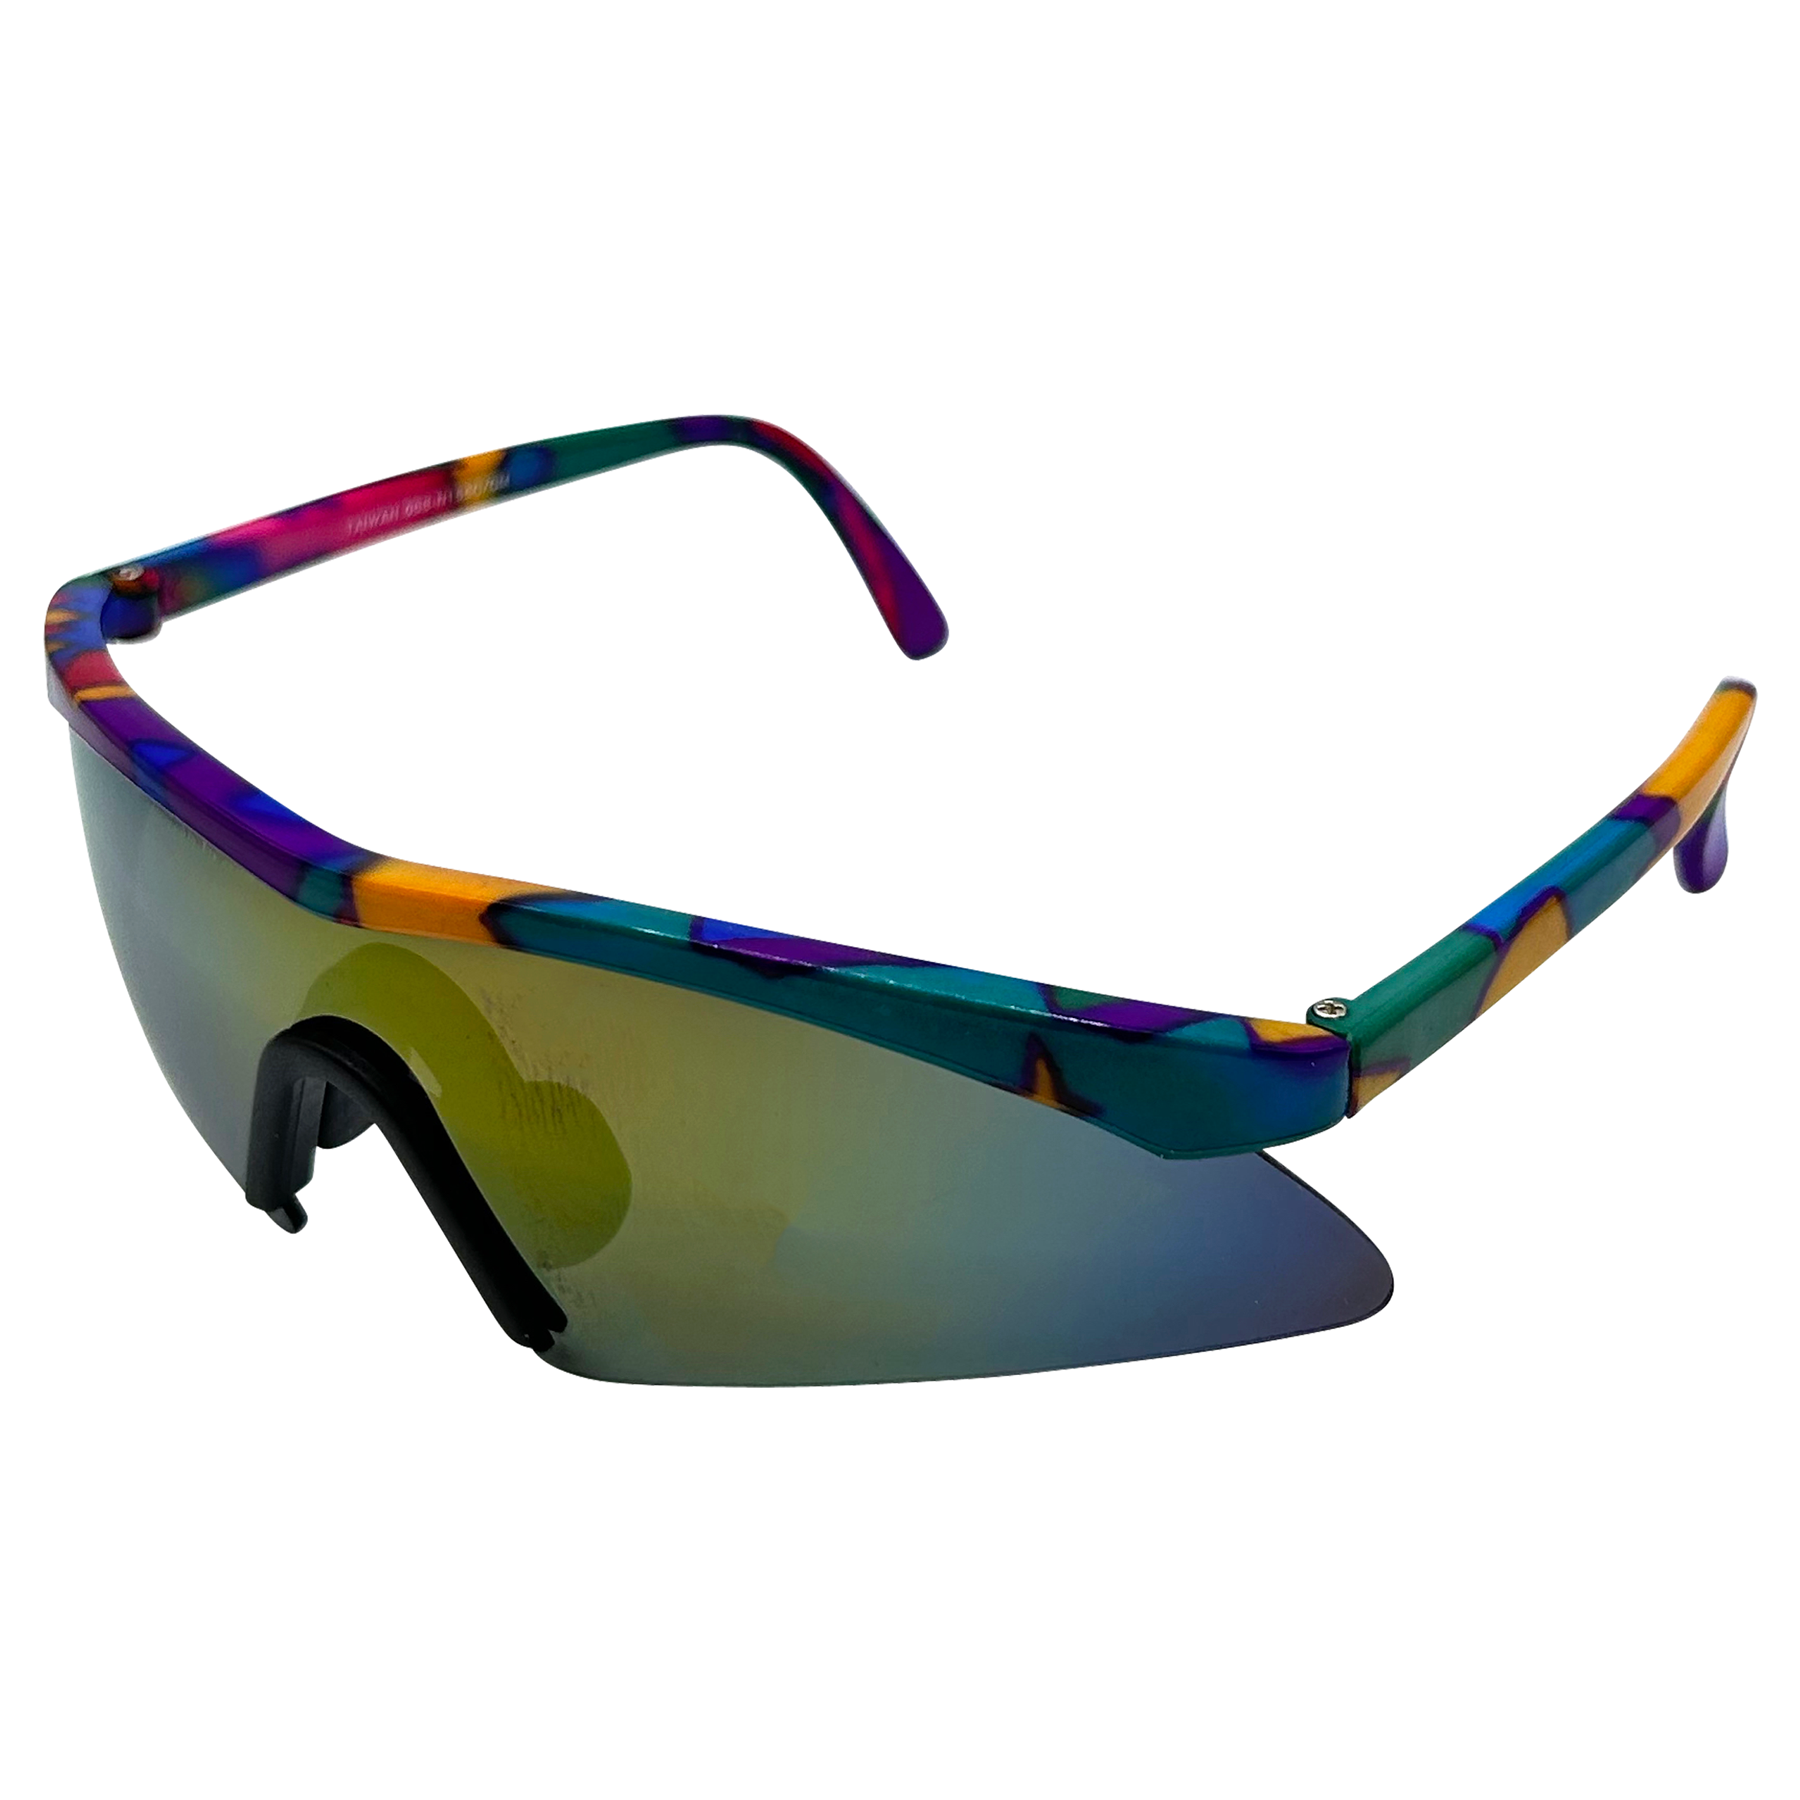 Buy ROCKBROS Unisex Adult Sports Sunglasses Multicolor Frame (Free Size) -  Pack of 1 at Amazon.in